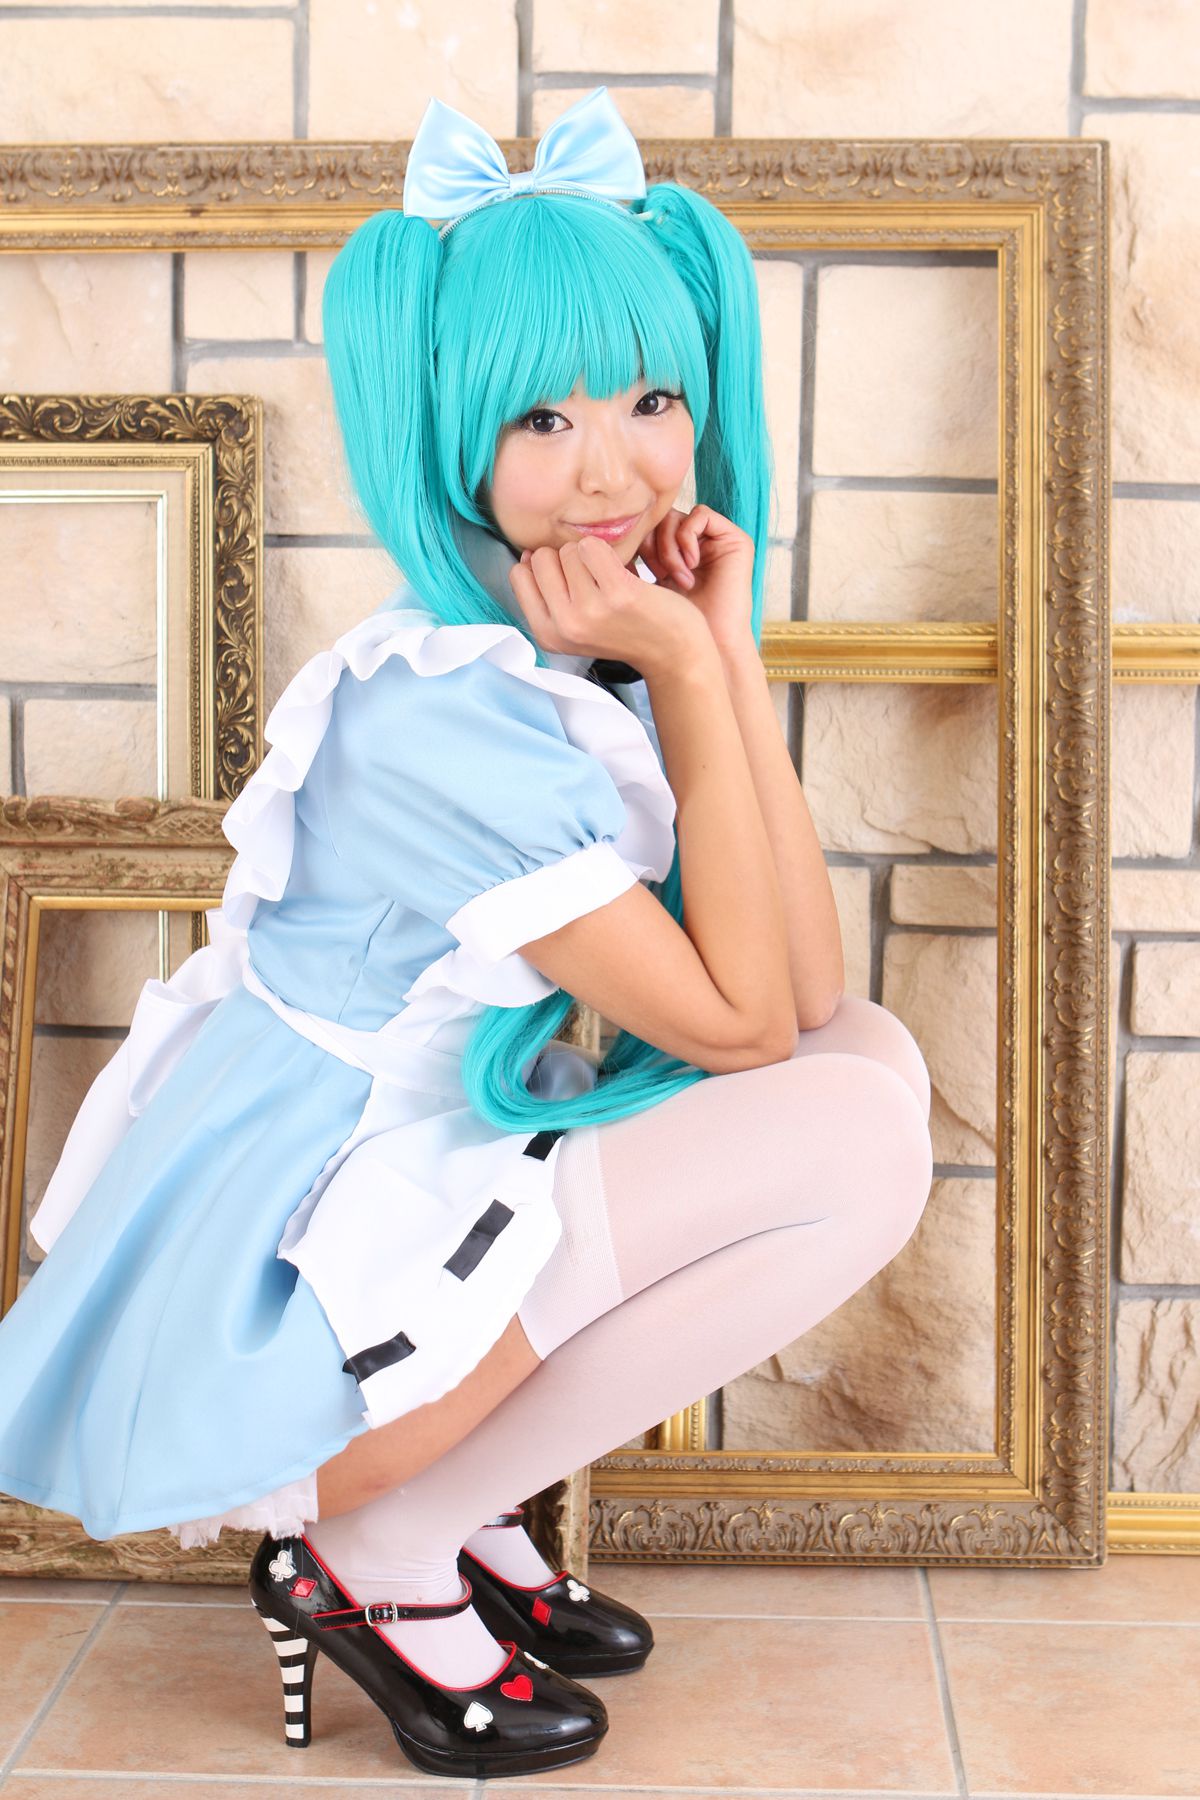 taotuhome[Cosplay套图] New Hatsune Miku from Vocaloid - So Sexy第78张